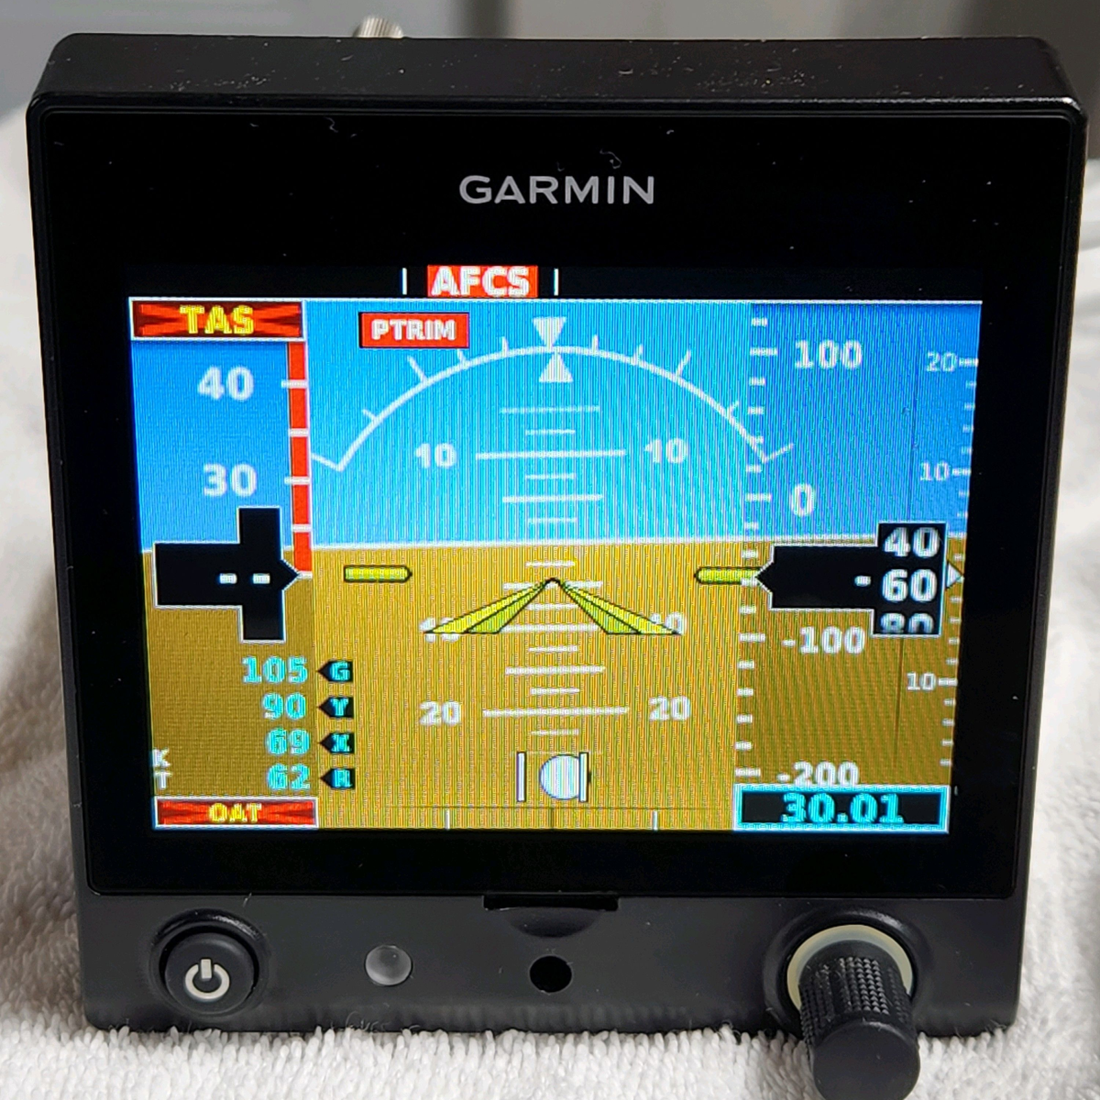 Used aircraft parts for sale, 011-03809-00 BEECHCRAFT F35 GARMIN G5 PRIMARY ELECTRONIC ATTITUDE DISPLAY